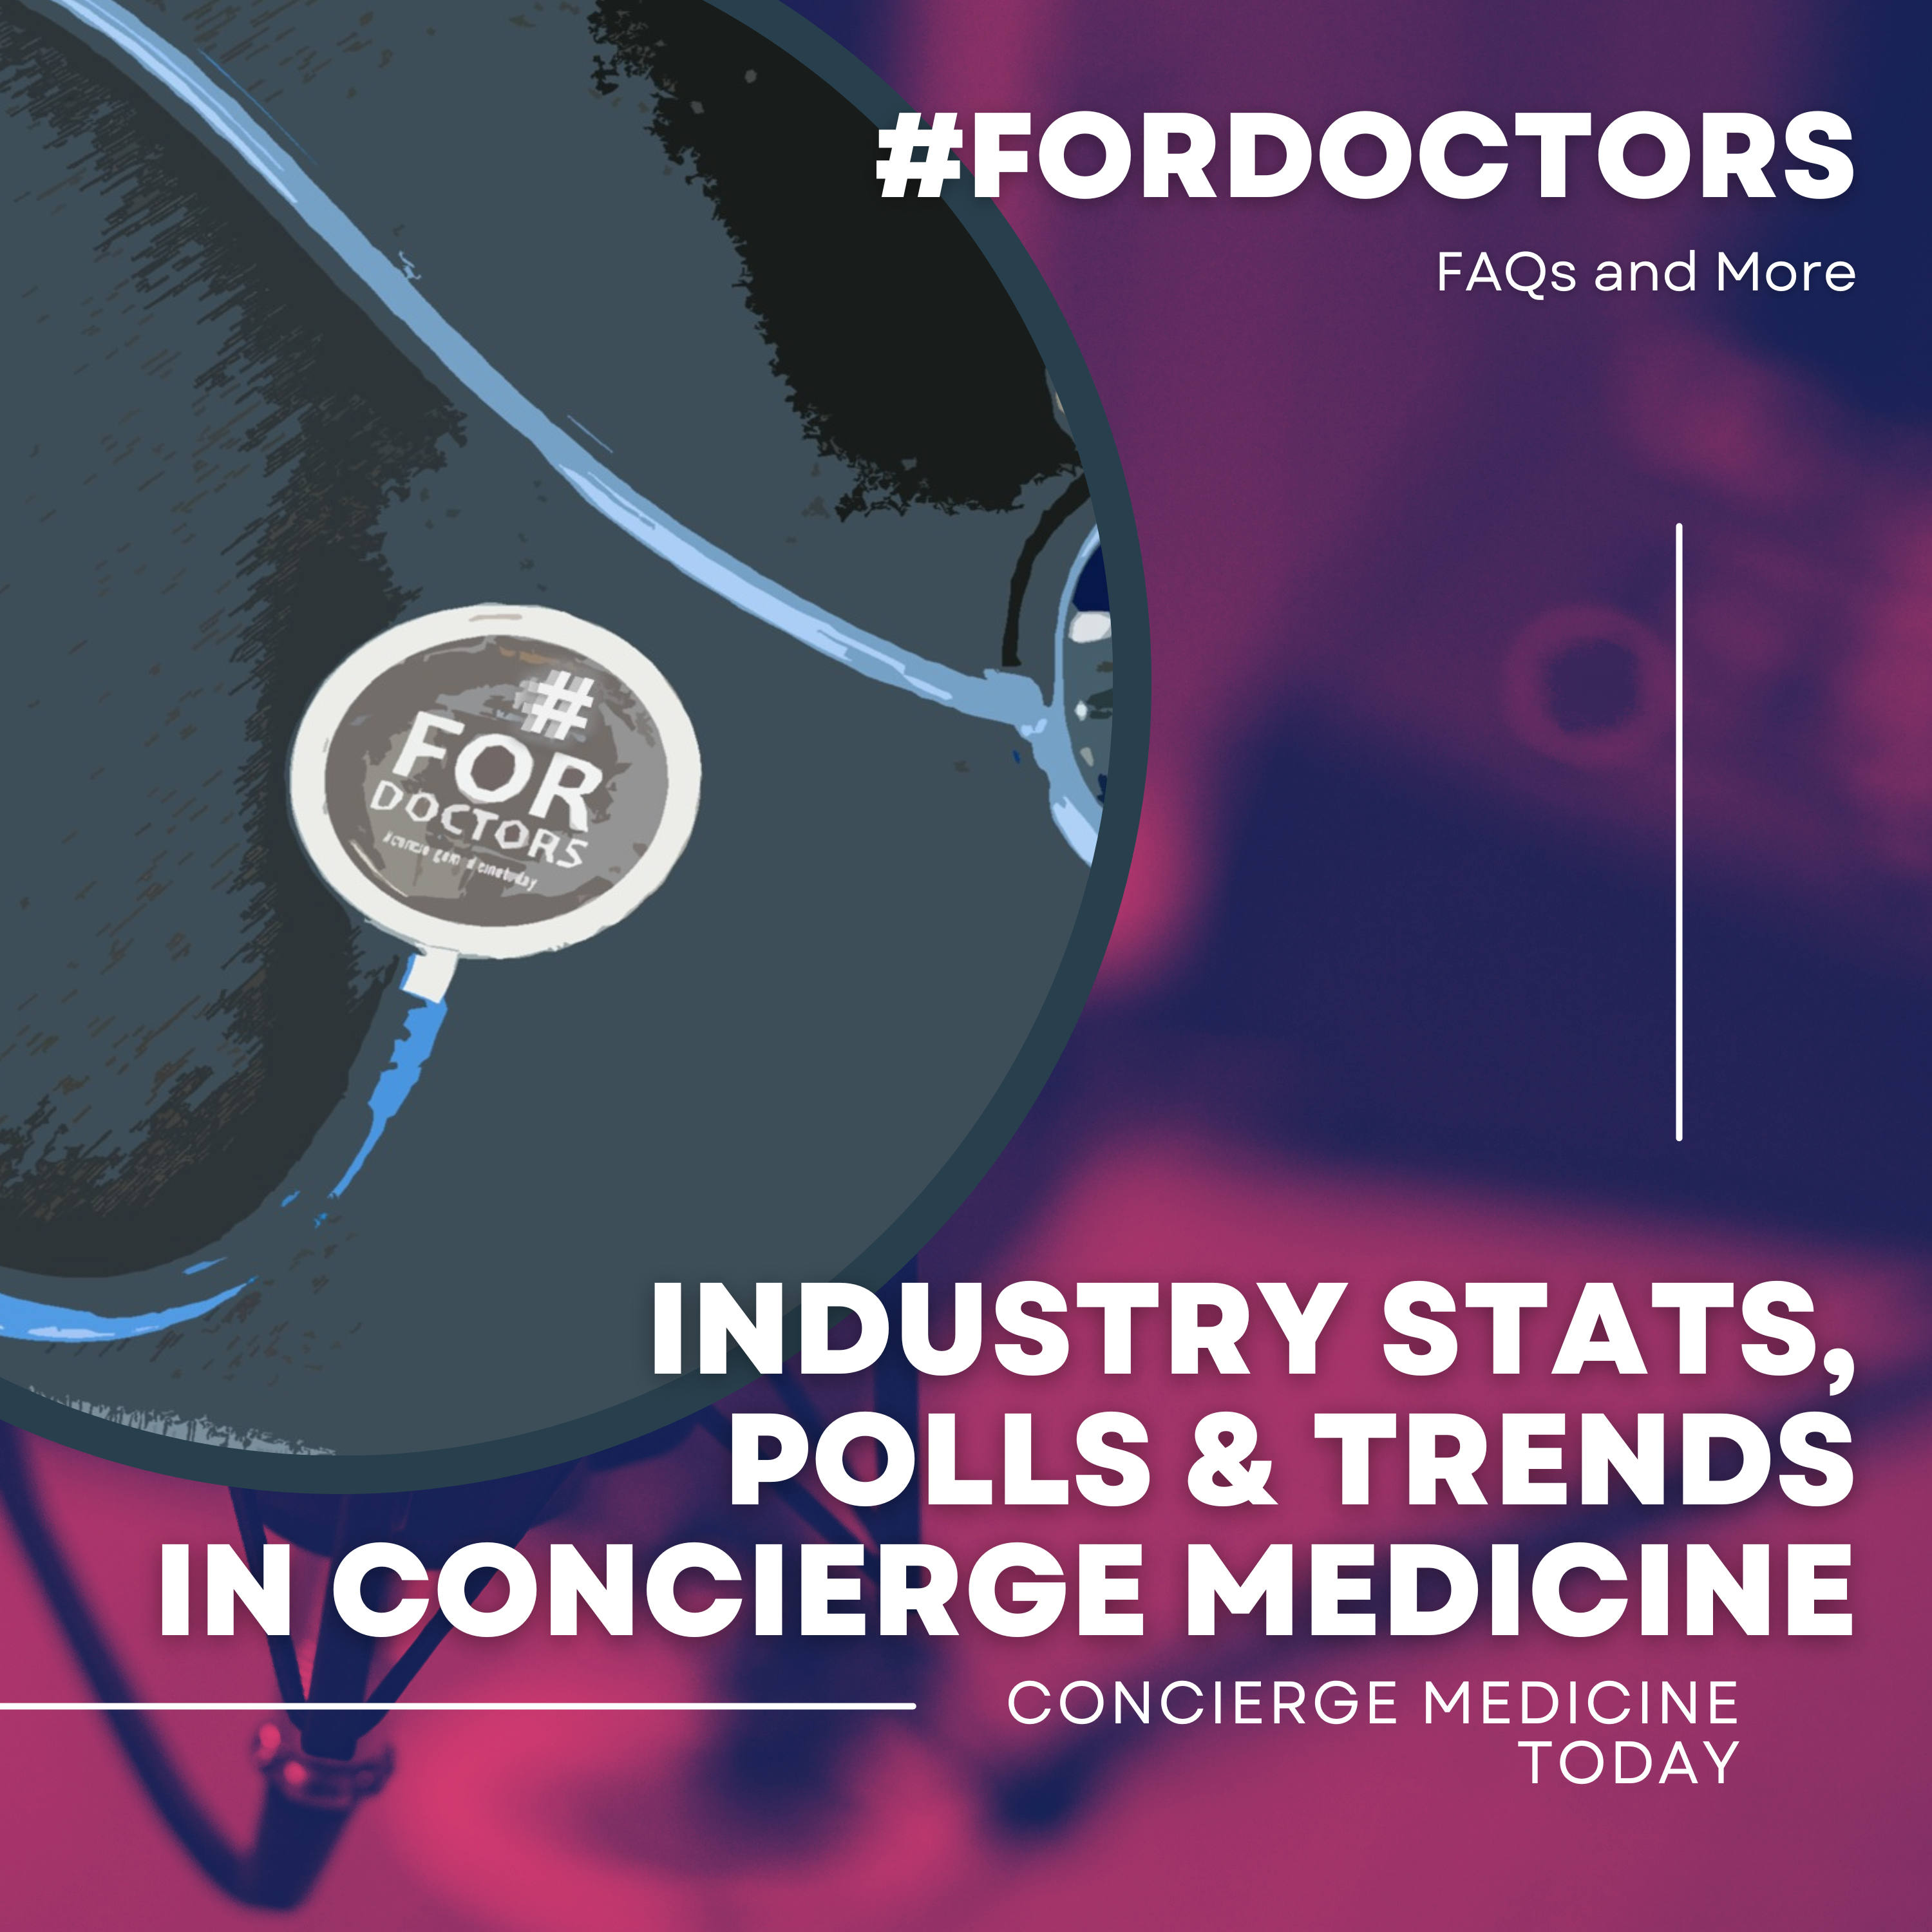 Growth, Entry and Conversions In Concierge Medicine